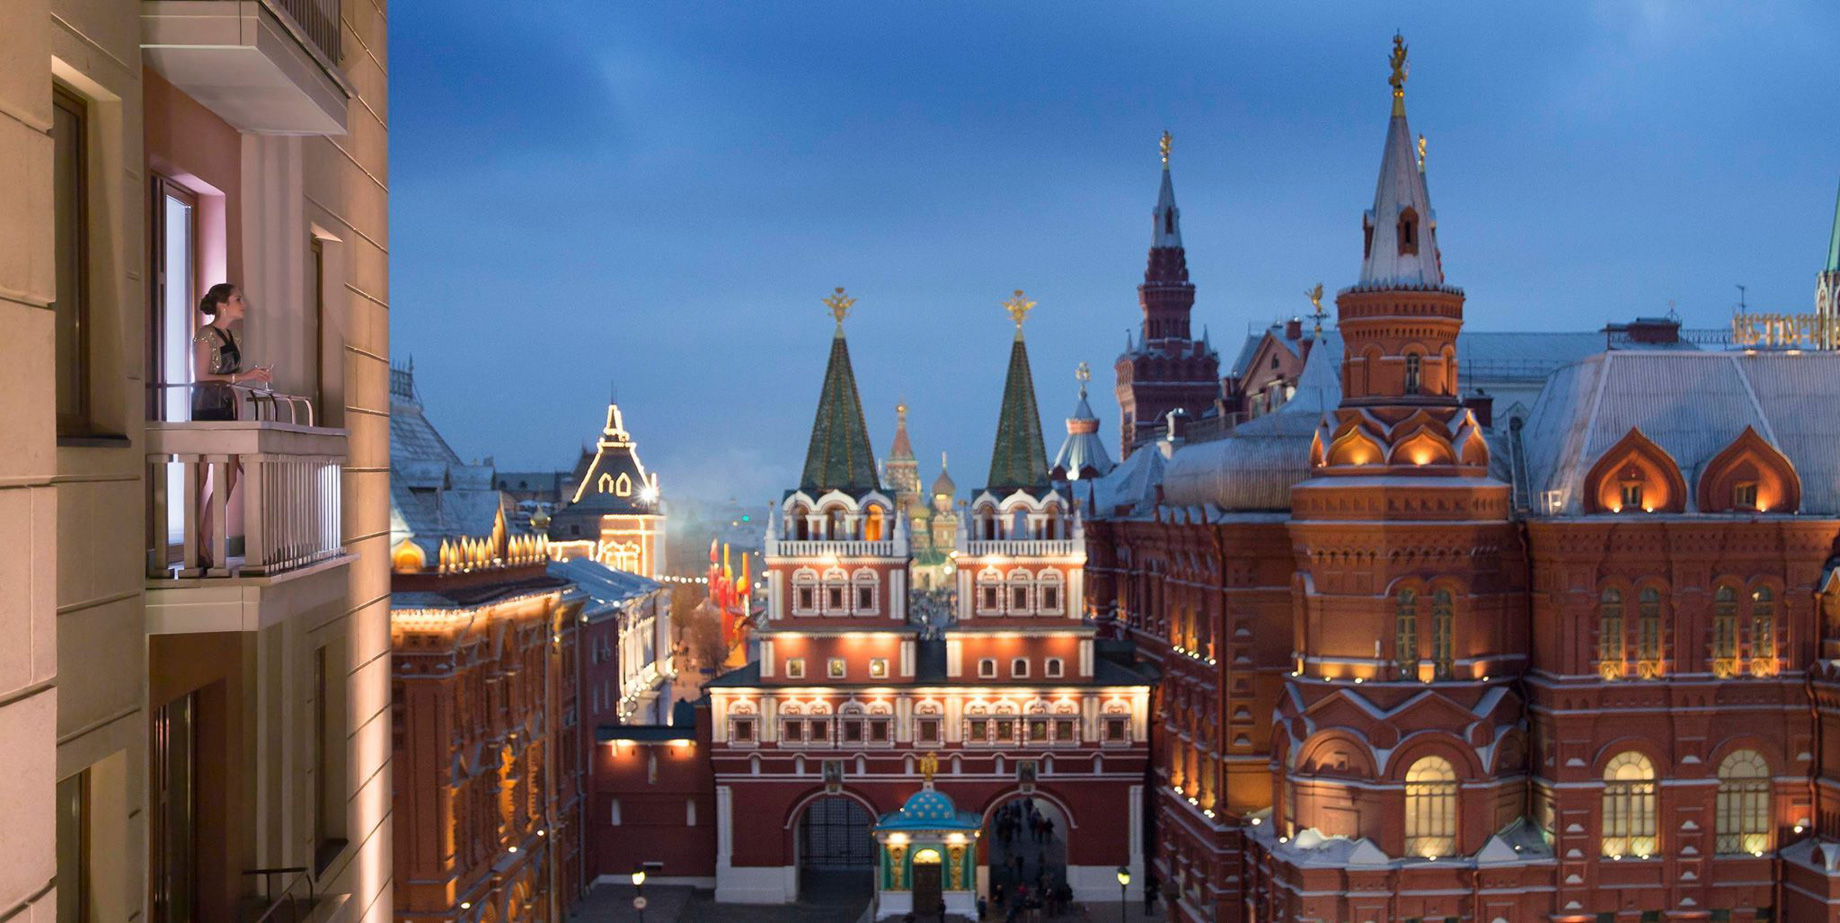 Four Seasons Hotel Moscow – Moscow, Russia – Night View